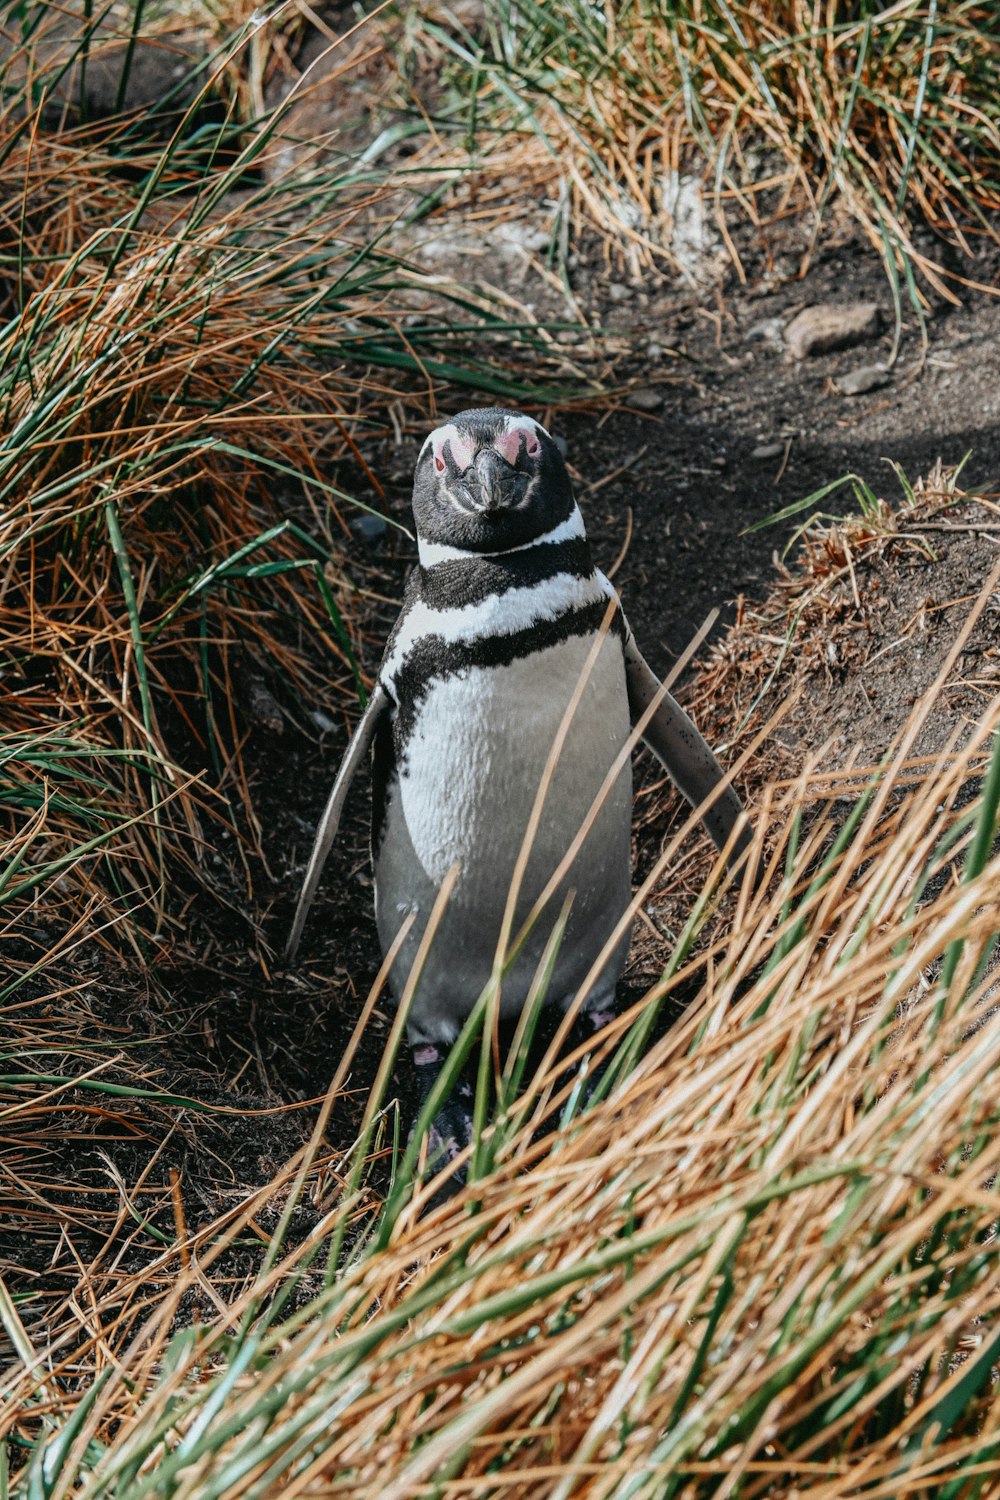 a penguin is standing in the grass by itself